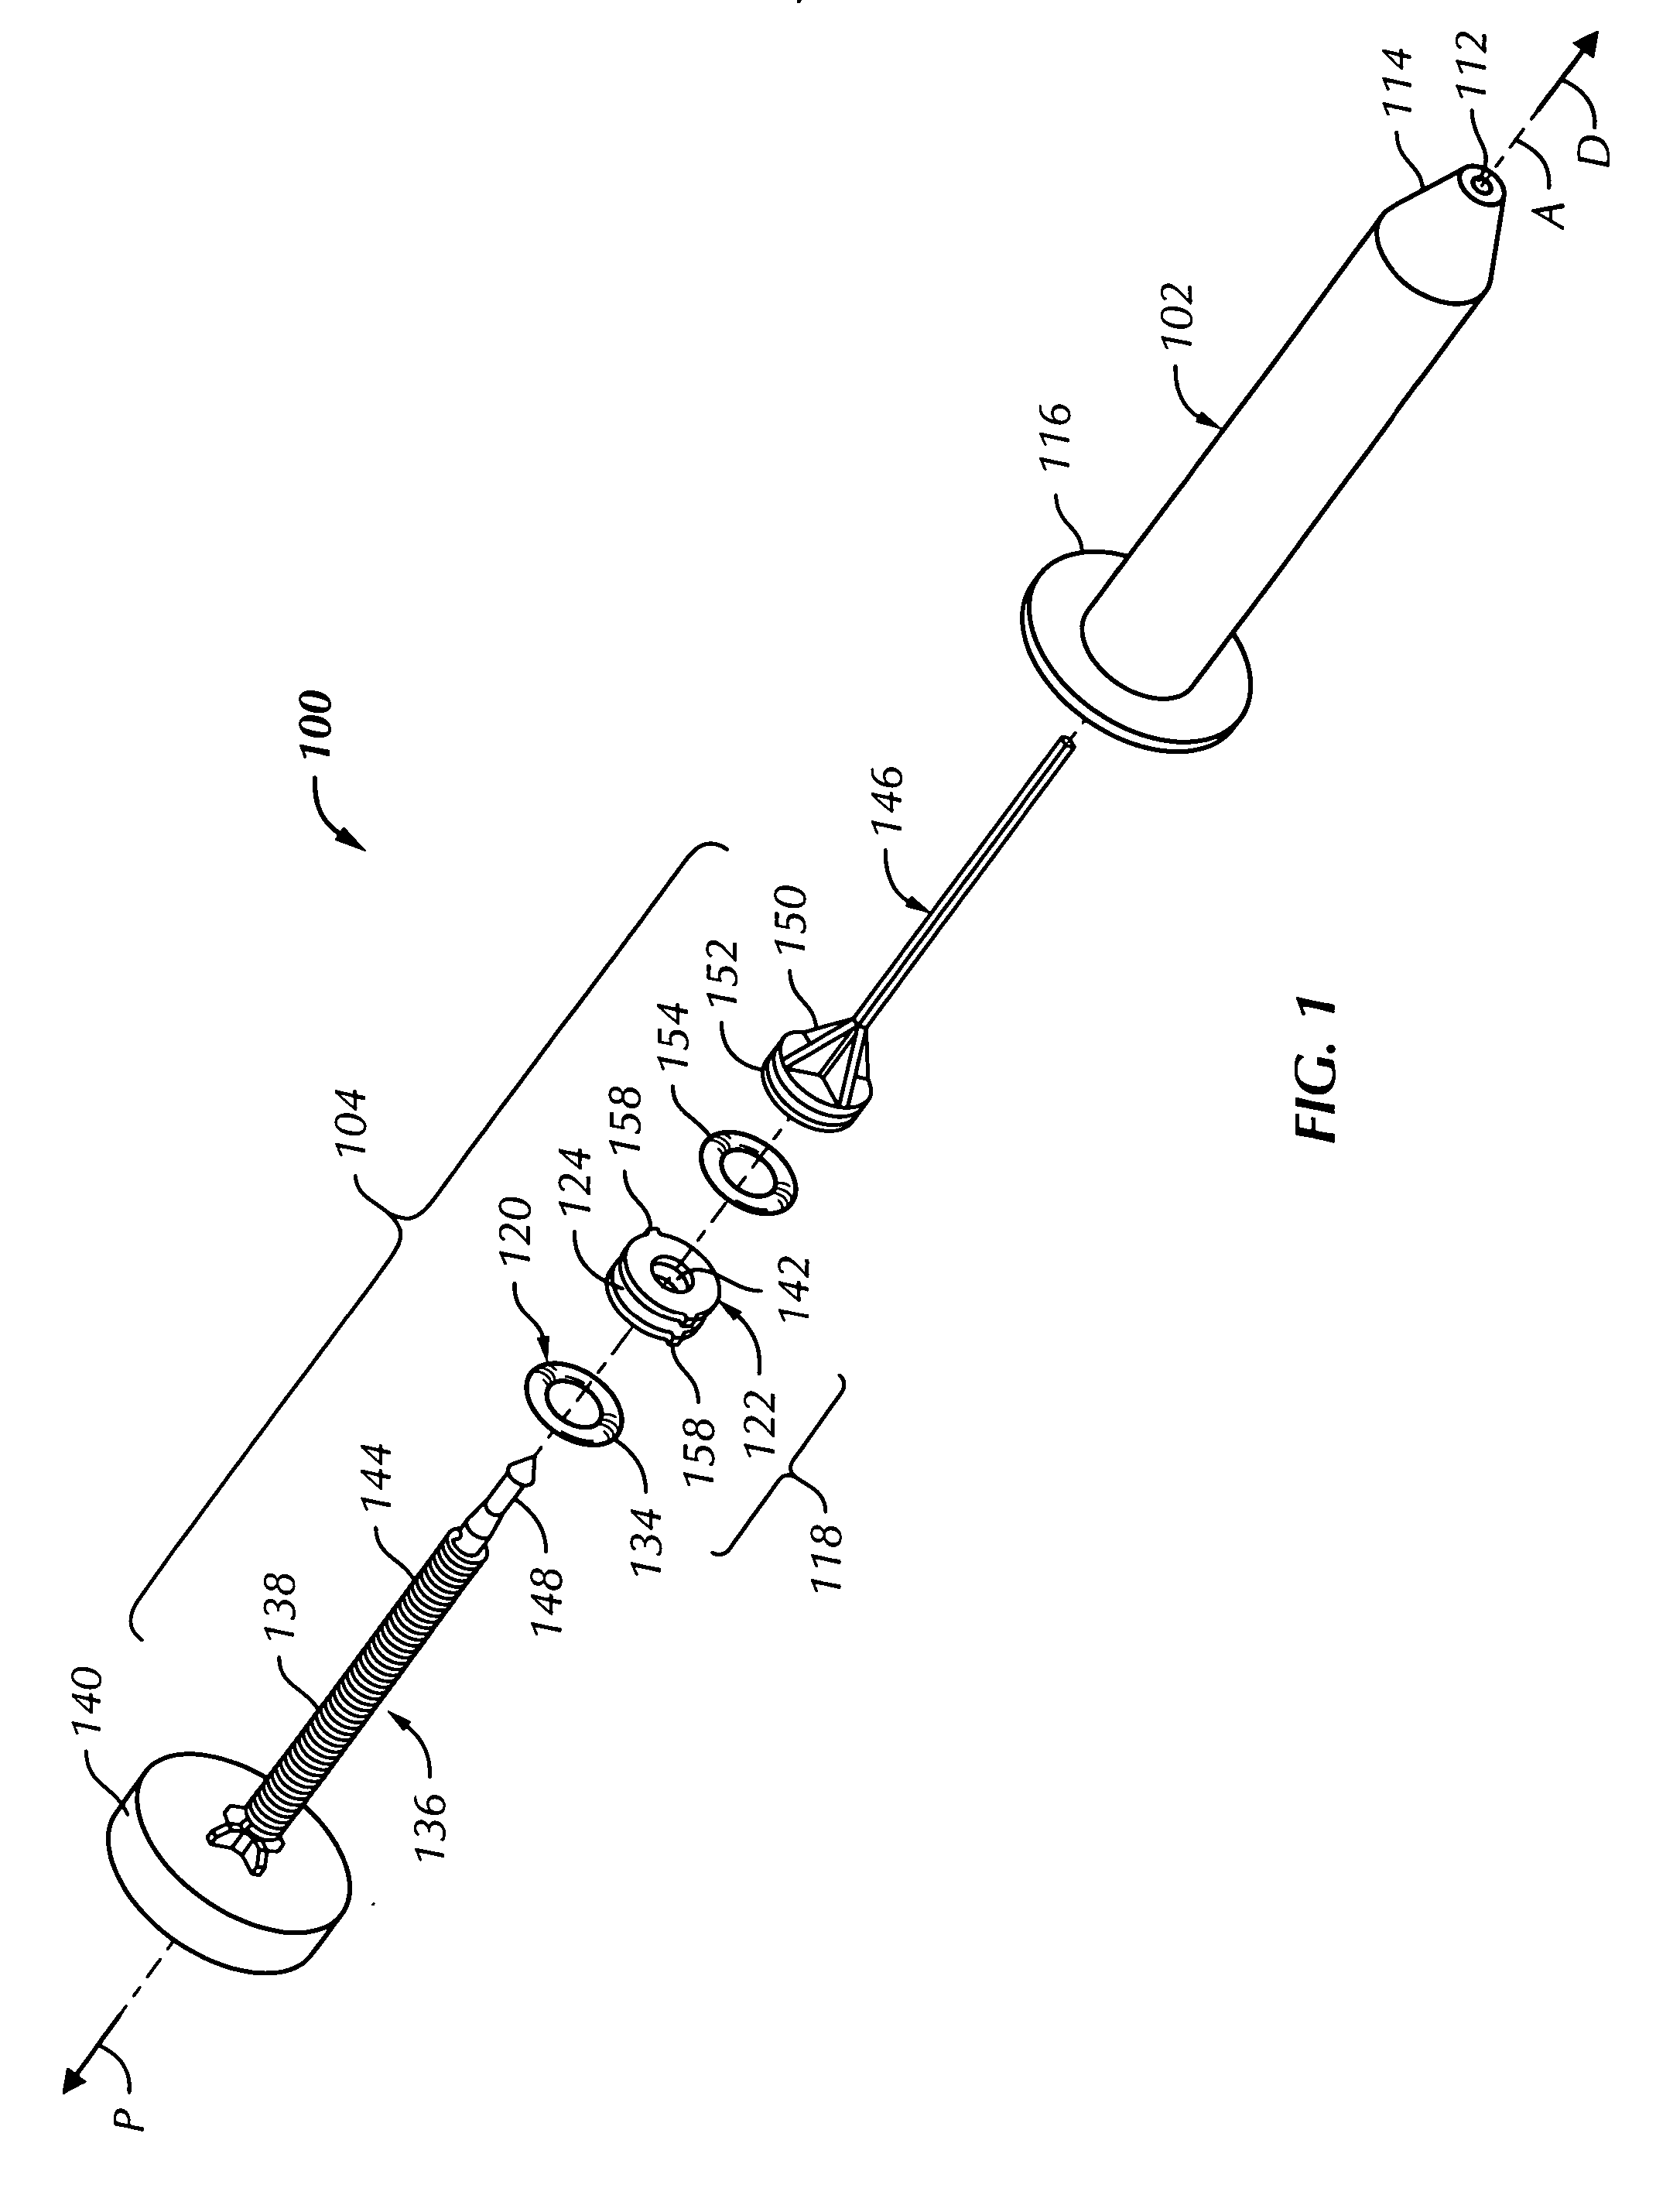 Multi-action device for inserting an intraocular lens into an eye